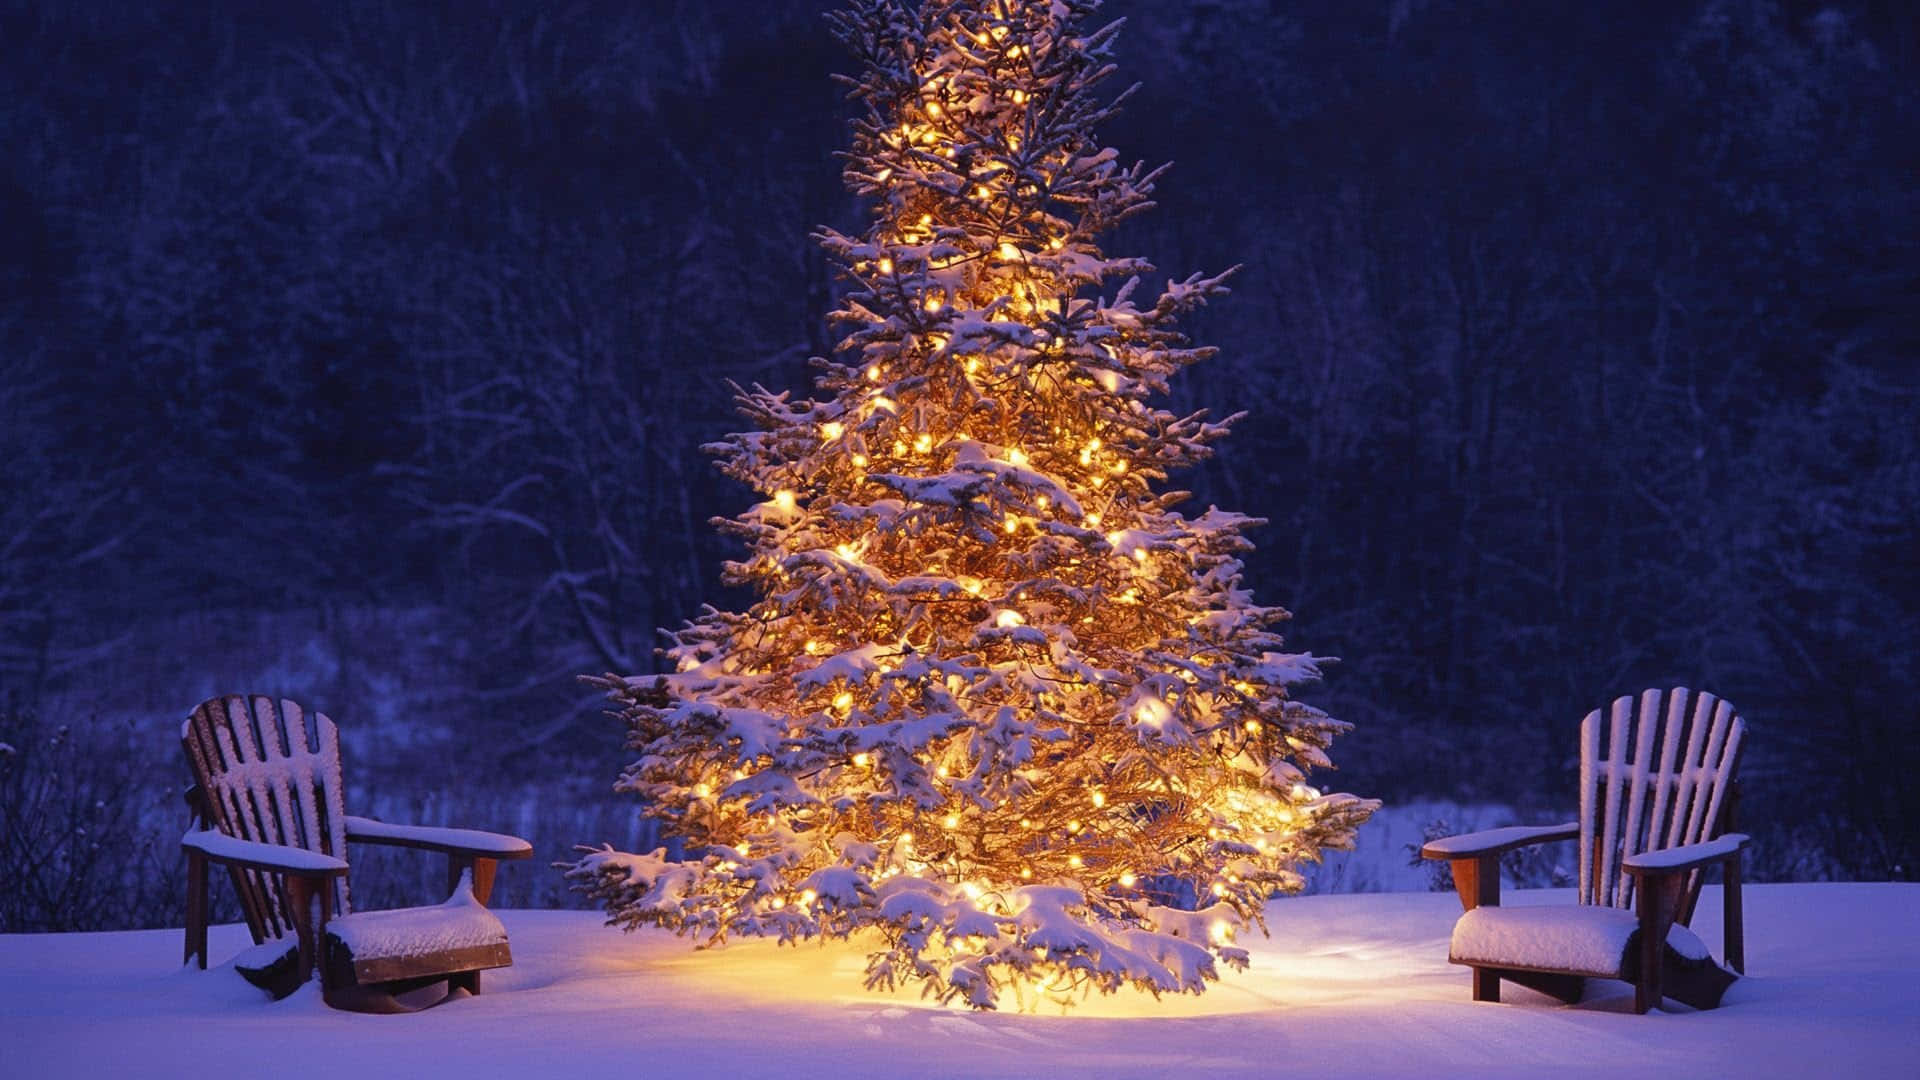 Let the beauty of Christmas fill your heart with joy